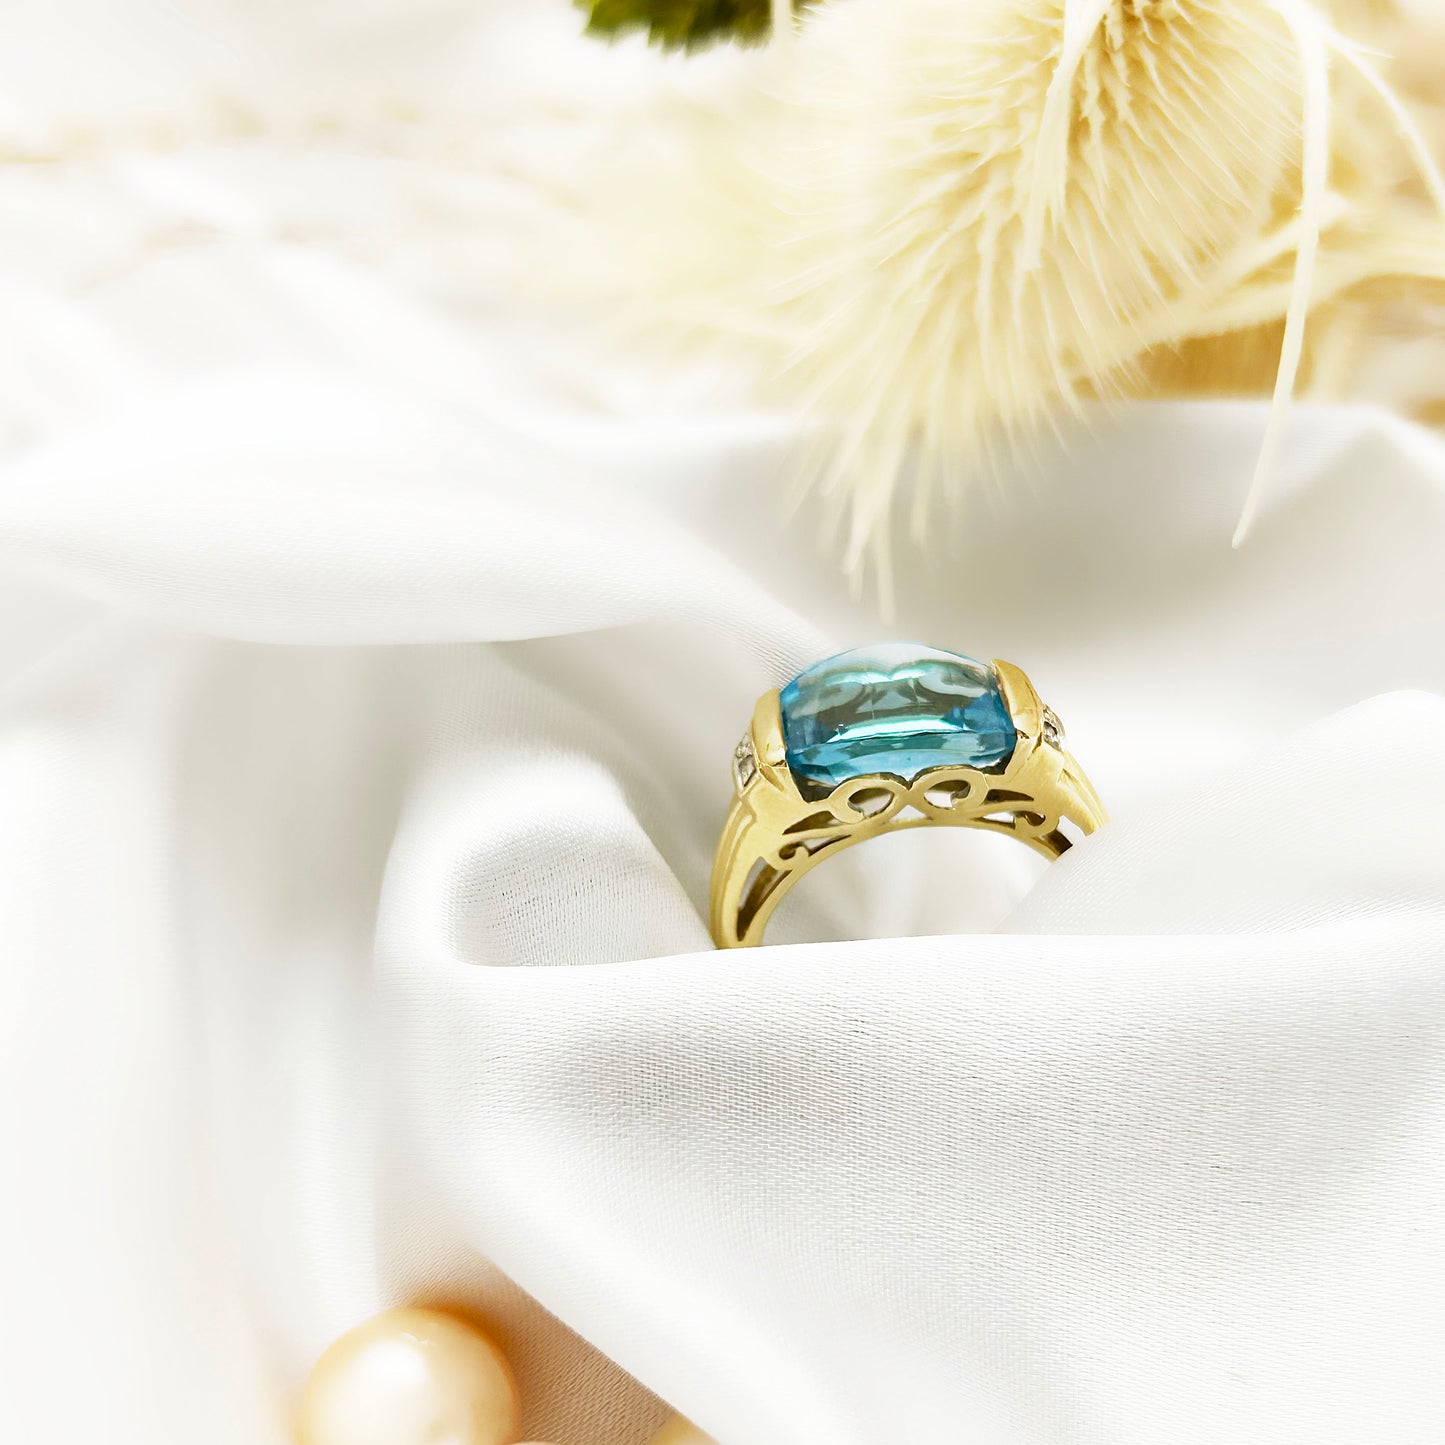 Vintage 14ct Gold Ring with Topaz & Diamonds